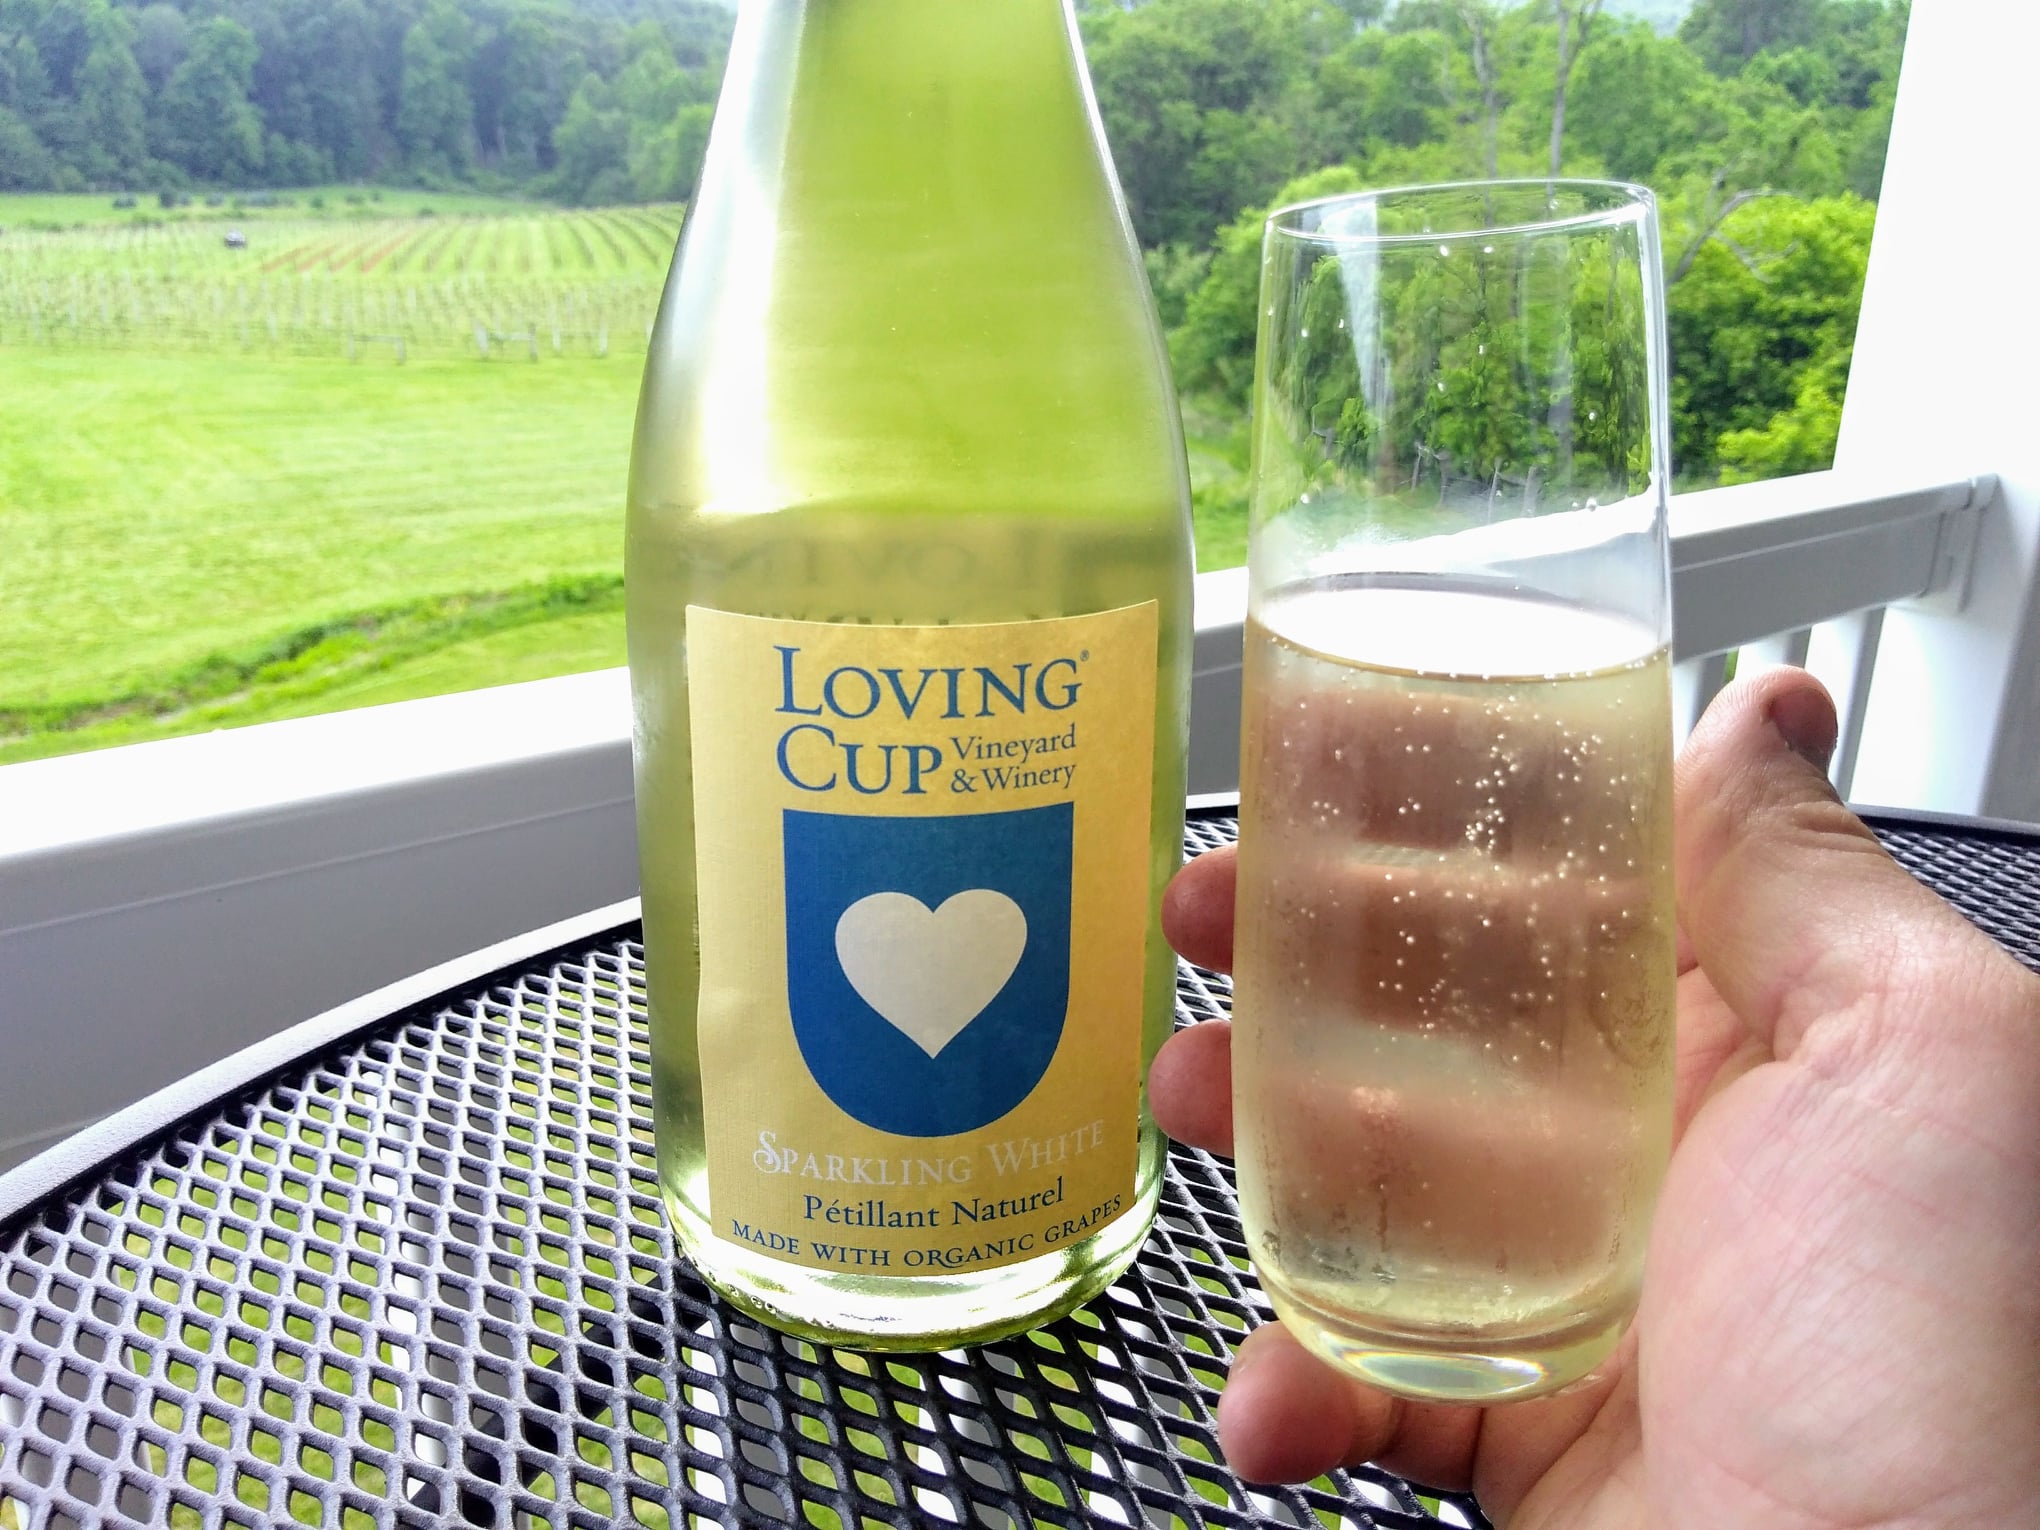 Loving Cup Vineyard and Winery